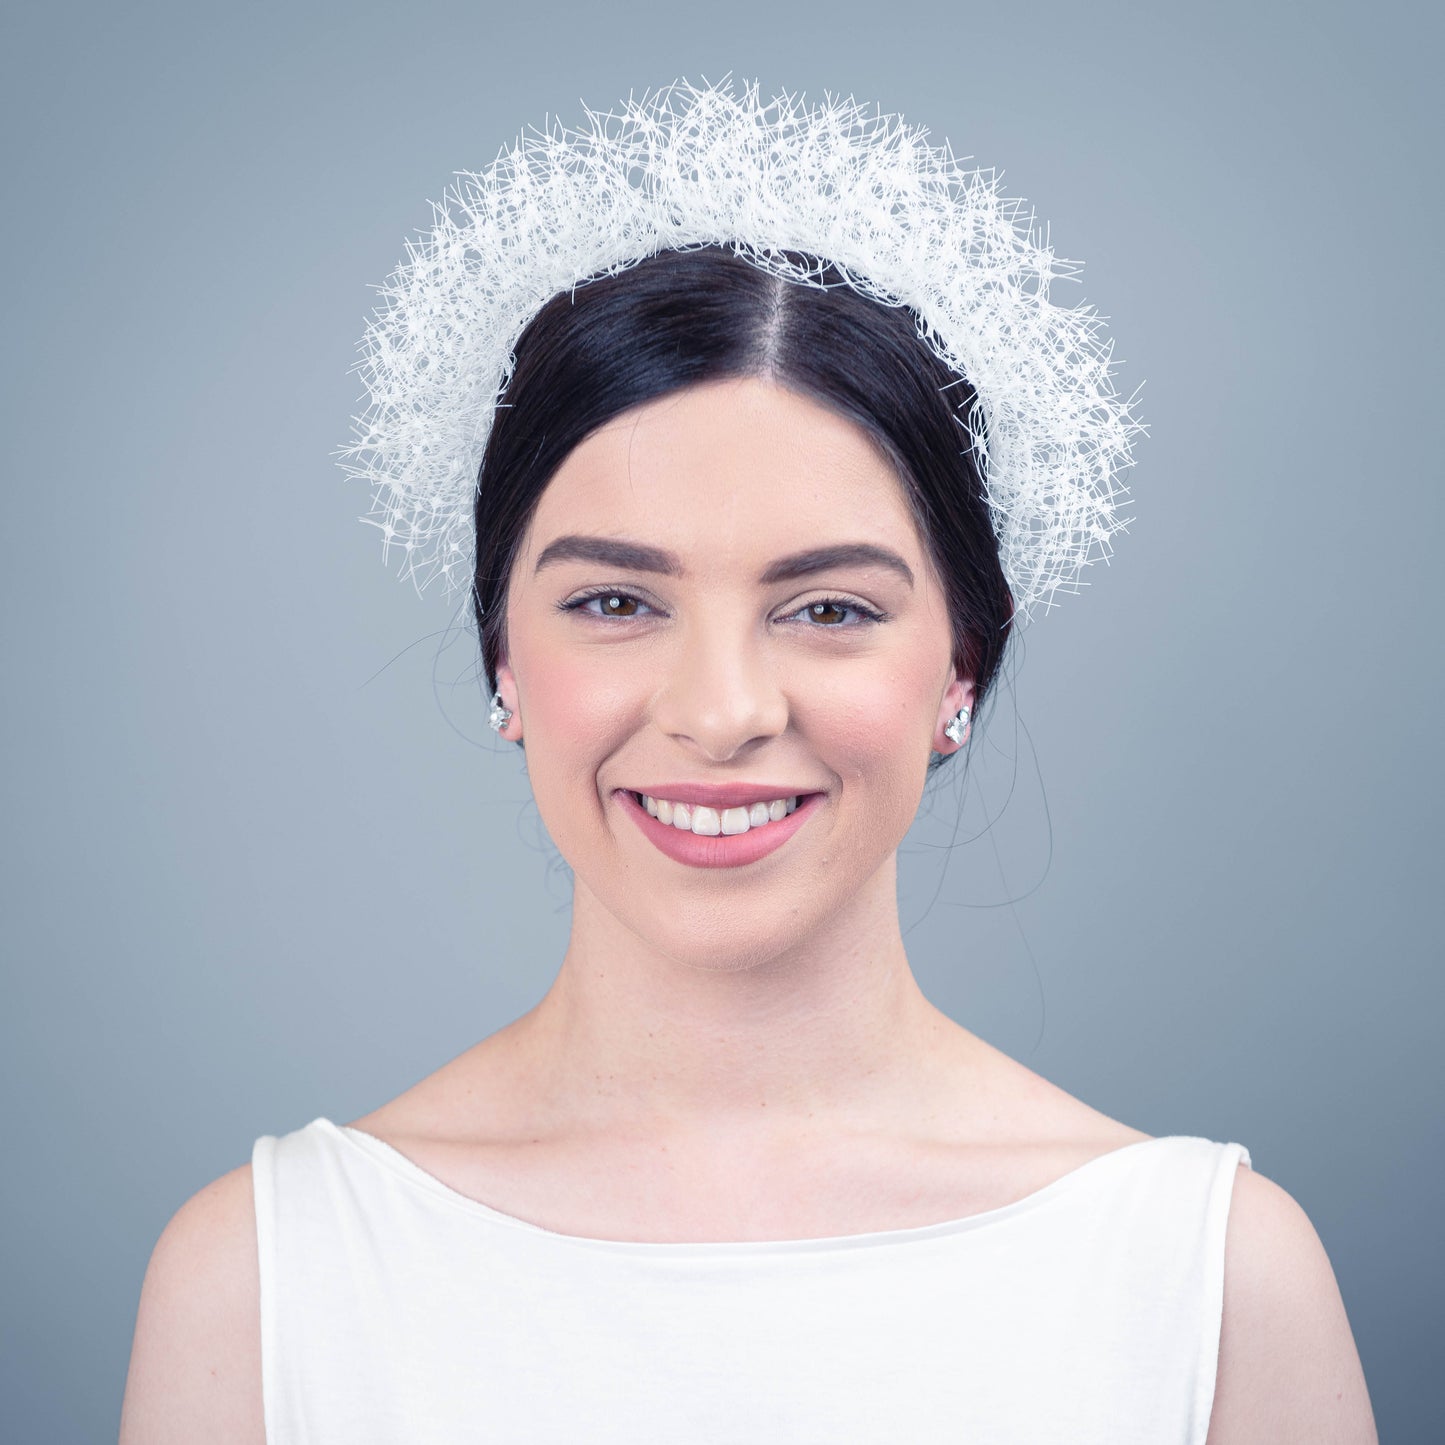 You Are the Best Thing Ruffle Veil Headpiece in Ivory